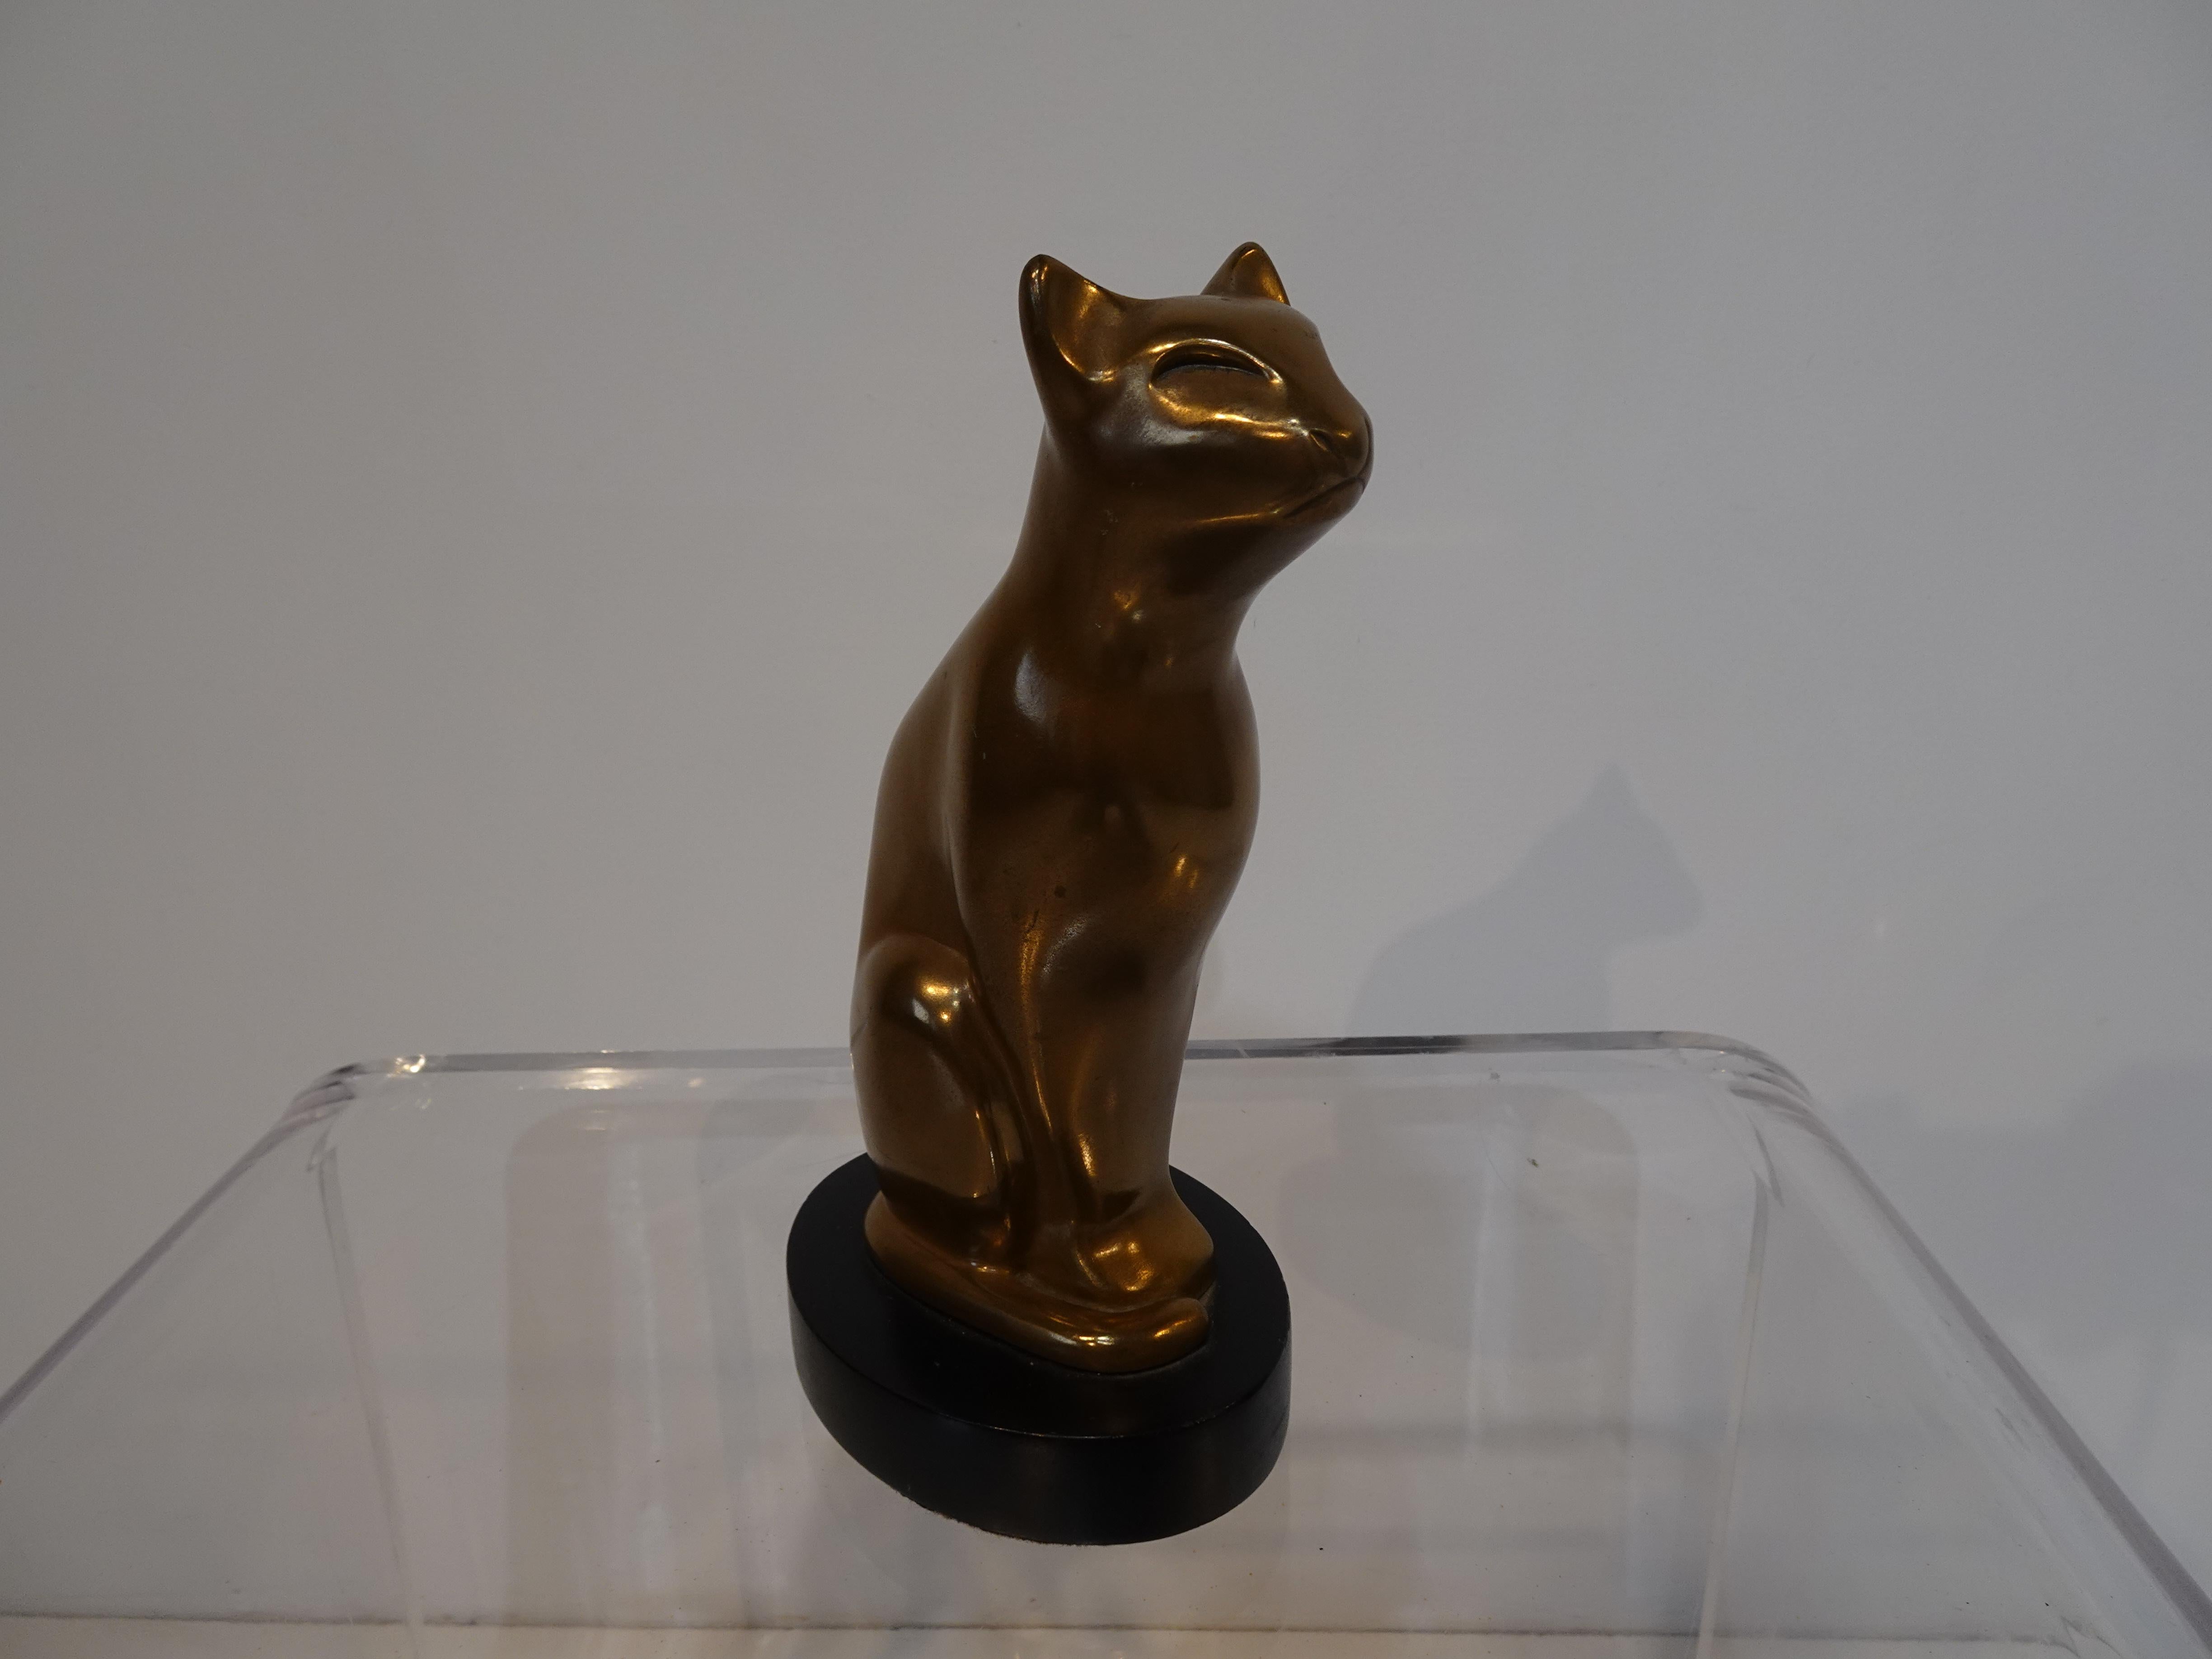 A very nice mid century cat sculpture cast in brass sitting on an oval satin black wood base, to the lower edge of the piece is the cast signature of the artist Dewitt.